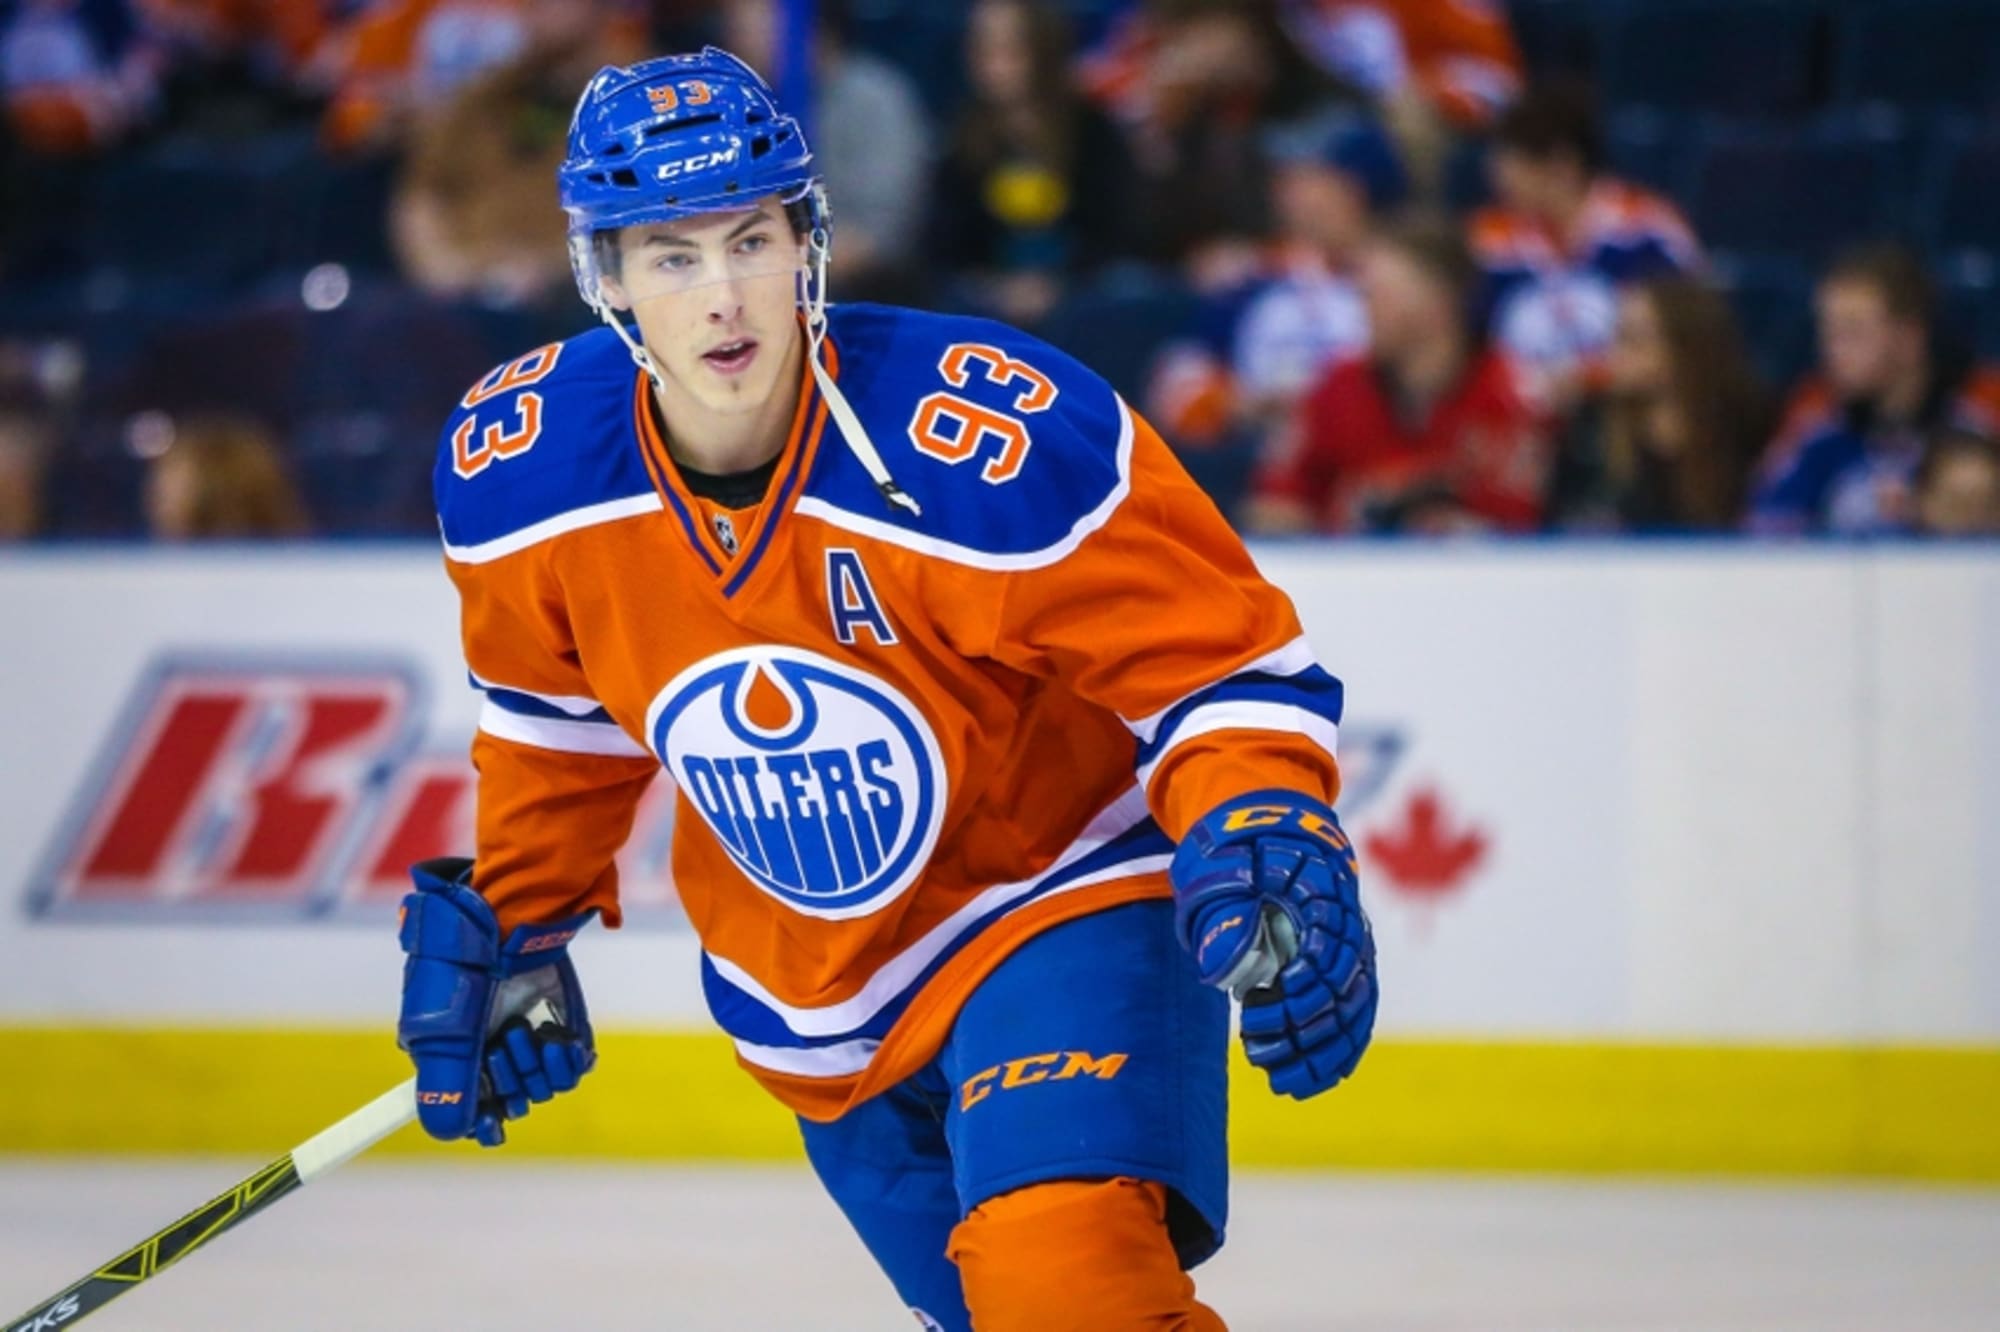 Ryan Nugent-Hopkins looks at home on line next to Leon Draisaitl